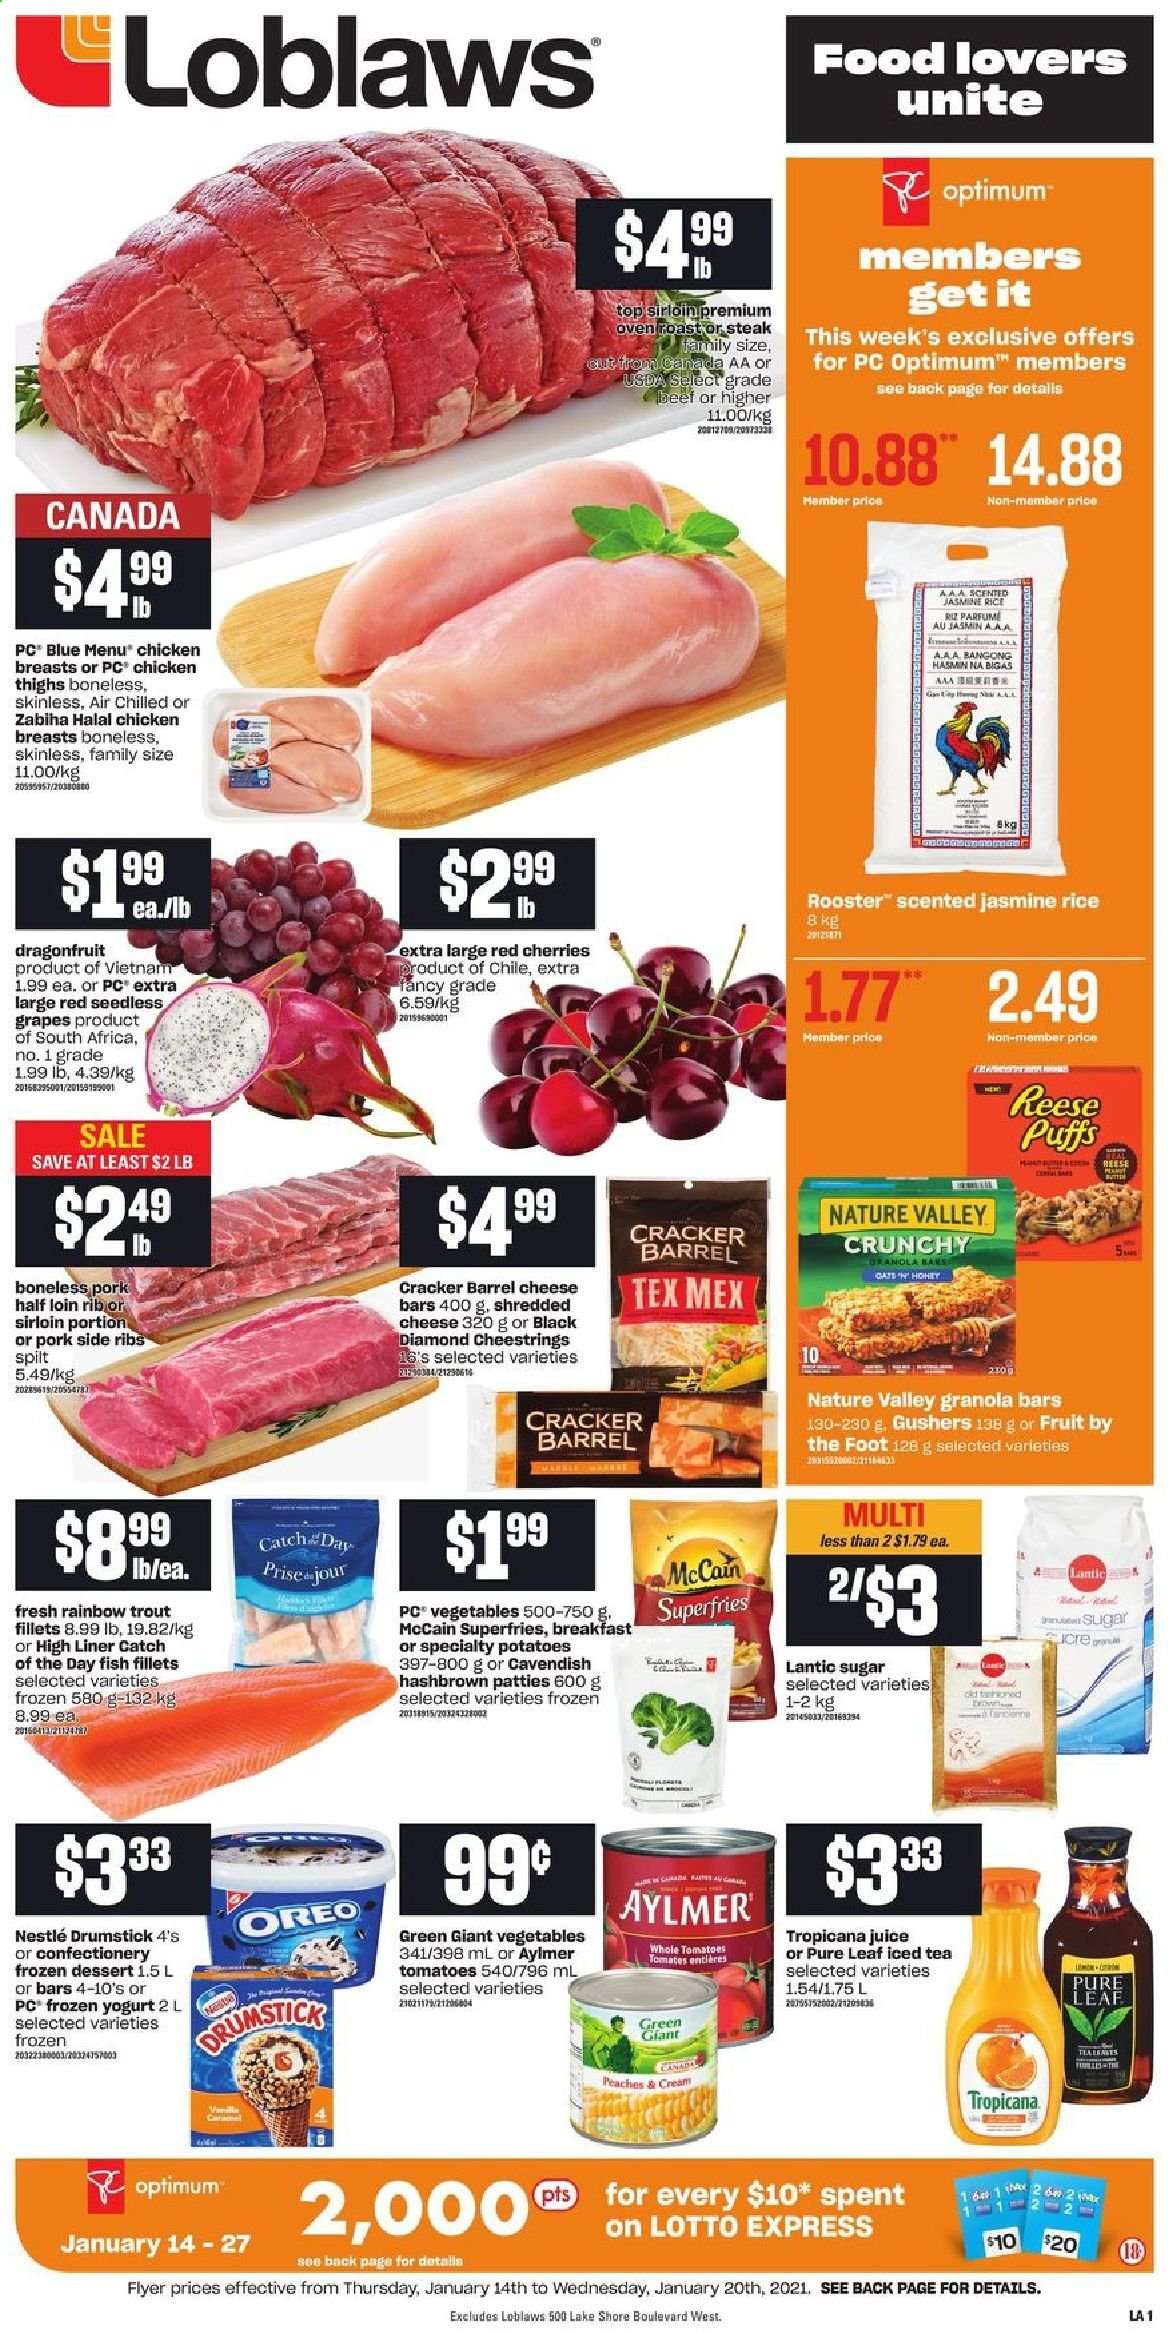 thumbnail - Loblaws Flyer - January 14, 2021 - January 20, 2021 - Sales products - puffs, tomatoes, potatoes, grapes, seedless grapes, cherries, peaches, fish fillets, trout, fish, shredded cheese, string cheese, yoghurt, McCain, potato fries, crackers, sugar, granola bar, Nature Valley, rice, jasmine rice, caramel, juice, ice tea, Pure Leaf, chicken breasts, chicken thighs, chicken, Optimum, Oreo, Nestlé, steak. Page 1.